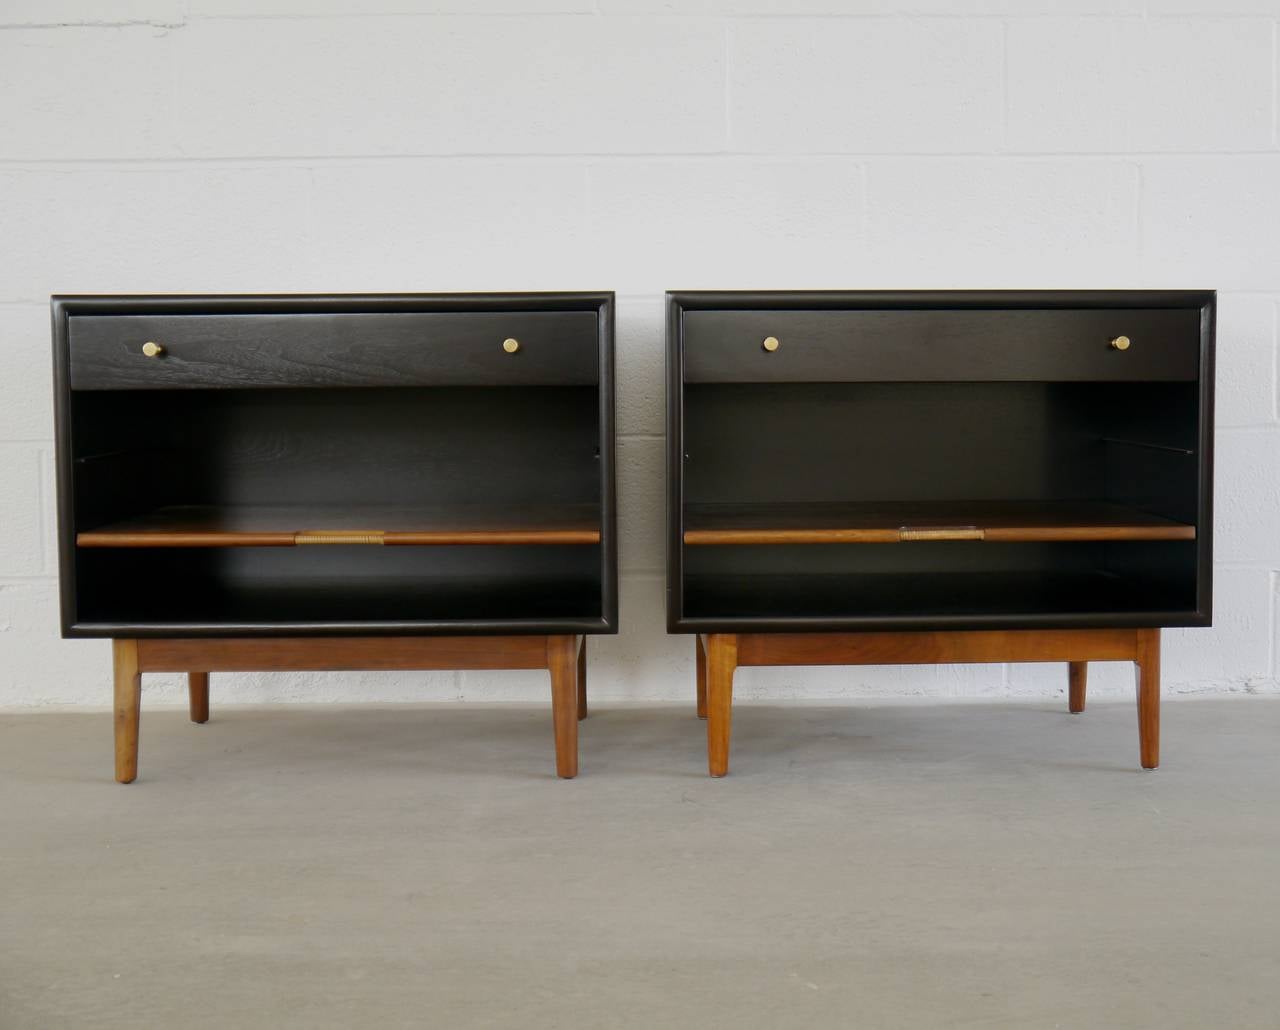 Night stands in walnut by Kipp Stewart for Drexel. These large nightstands have drawers and an adjustable sliding shelf with raffia handles. The pulls are solid machined brass. We borrowed the finish from Dunbar pieces of the period, the cases done